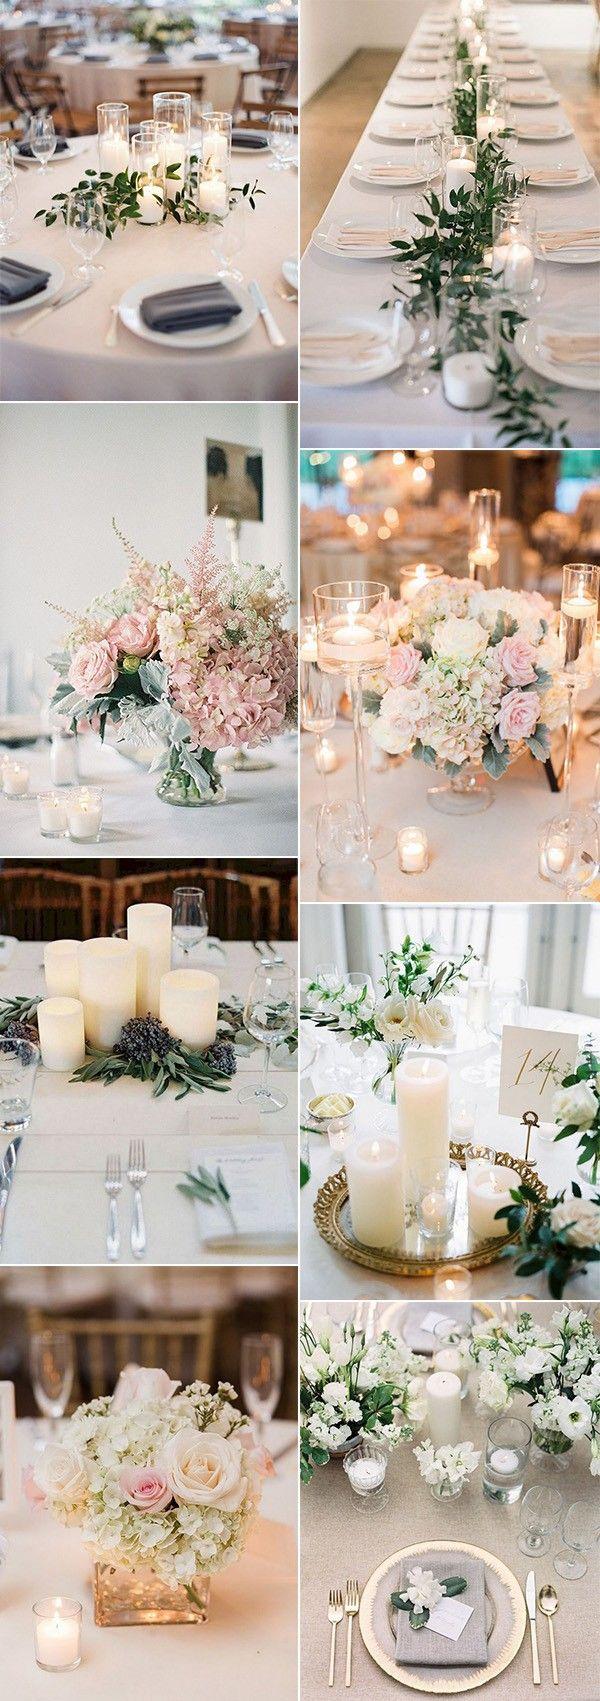 Wedding - 20 Elegant Wedding Centerpieces With Candles For 2018 Trends